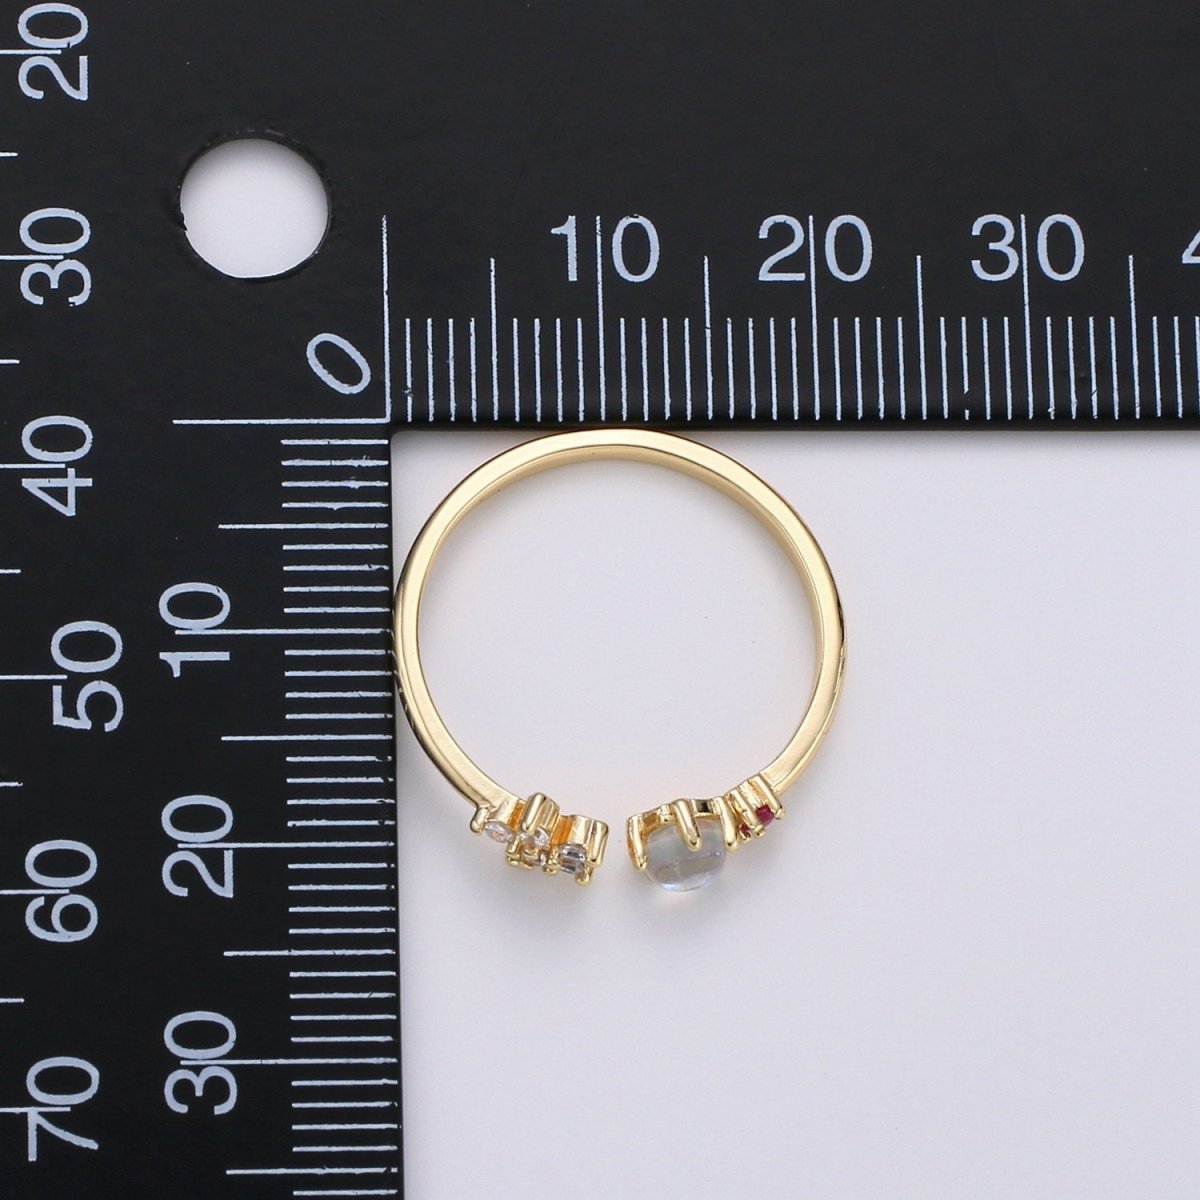 Gold Flower Ring, Dainty Floral Ring, Adjustable Ring, Minimalist Opal Ring, Minimalist Ring, Gold Open Ring, Dainty Jewelry R-086 - DLUXCA